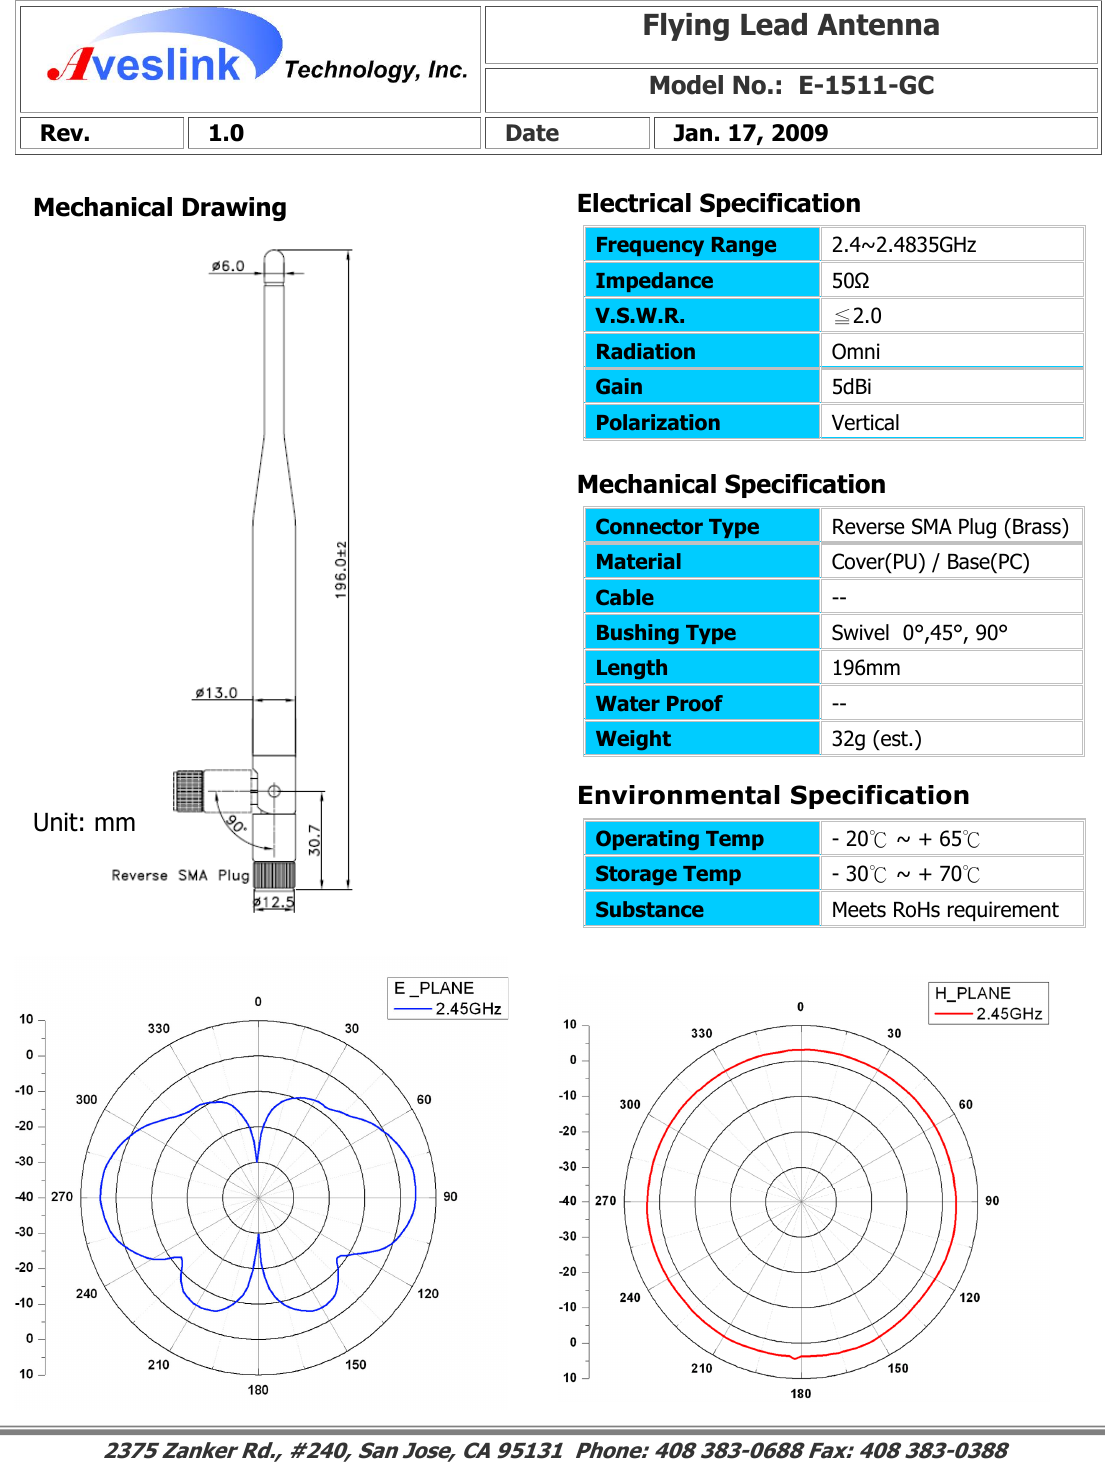 Mechanical DrawingMechanical Specification Environmental SpecificationFlying Lead Antenna Model No.:  E-1511-GC  Rev.   1.0   Date   Jan. 17, 2009 Connector Type   Reverse SMA Plug (Brass)Material  Cover(PU) / Base(PC) Cable  -- Bushing Type  Swivel  0°,45°, 90° Length  196mm Water Proof  -- Weight  32g (est.)                                                                                                                                                                                                                        2375 Zanker Rd., #240, San Jose, CA 95131  Phone: 408 383-0688 Fax: 408 383-0388 Operating Temp  - 20℃ ~ + 65℃ Storage Temp  - 30℃ ~ + 70℃ Substance  Meets RoHs requirement Electrical SpecificationFrequency Range   2.4~2.4835GHz Impedance  50Ω V.S.W.R.  ≦2.0 Radiation  Omni Gain  5dBi Polarization  Vertical Unit: mm 